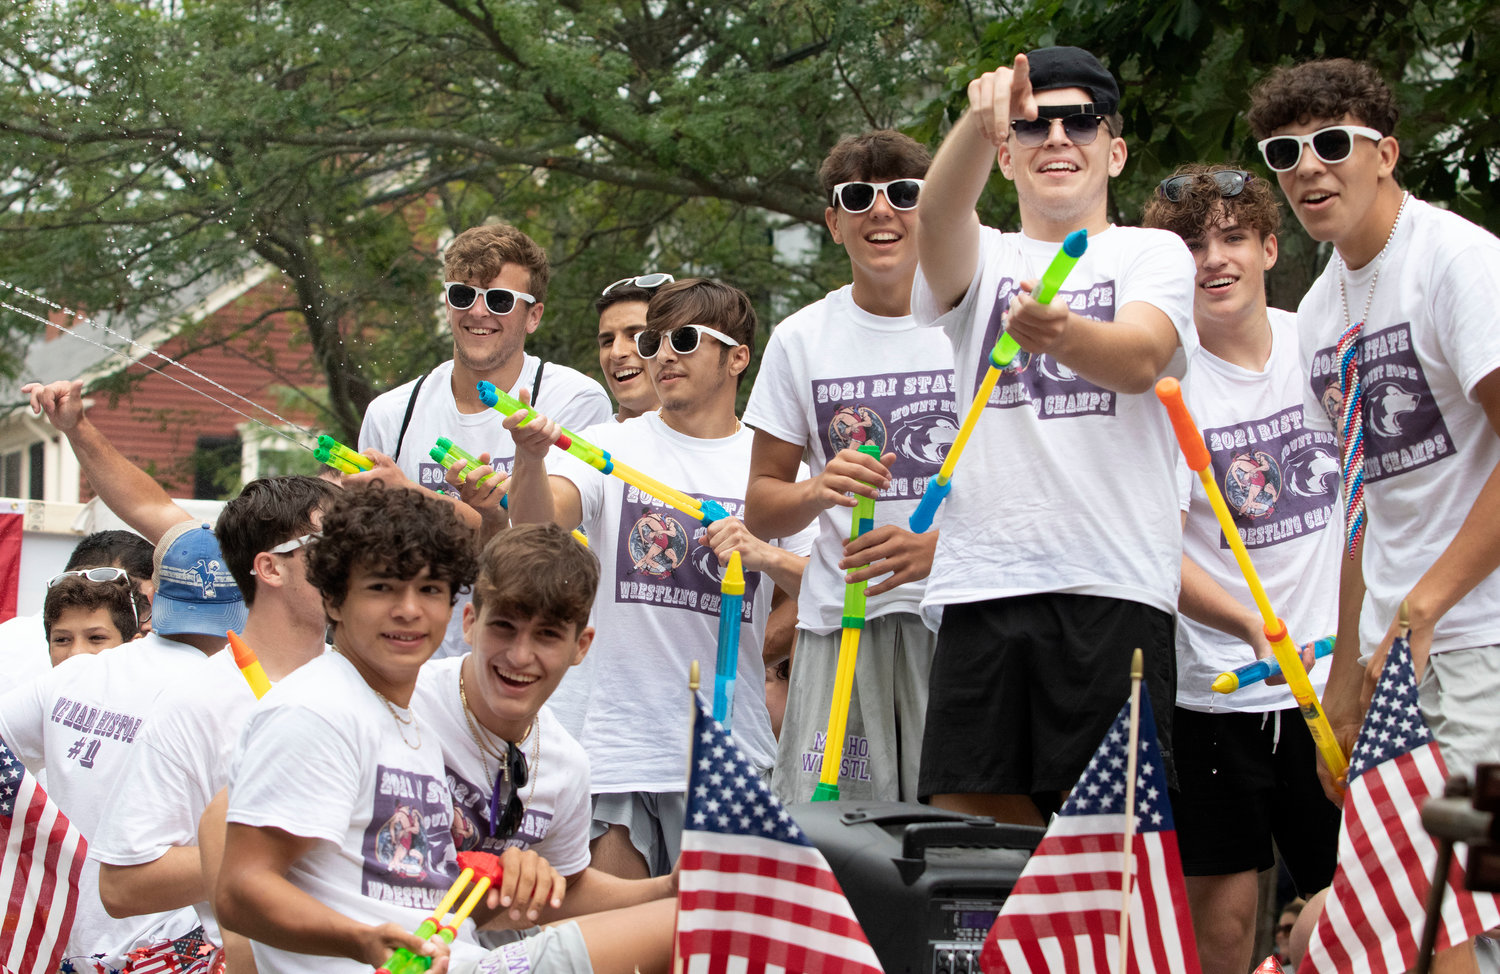 The state champion Mt. Hope High School wrestling team has fun while spraying water guns atop their float.